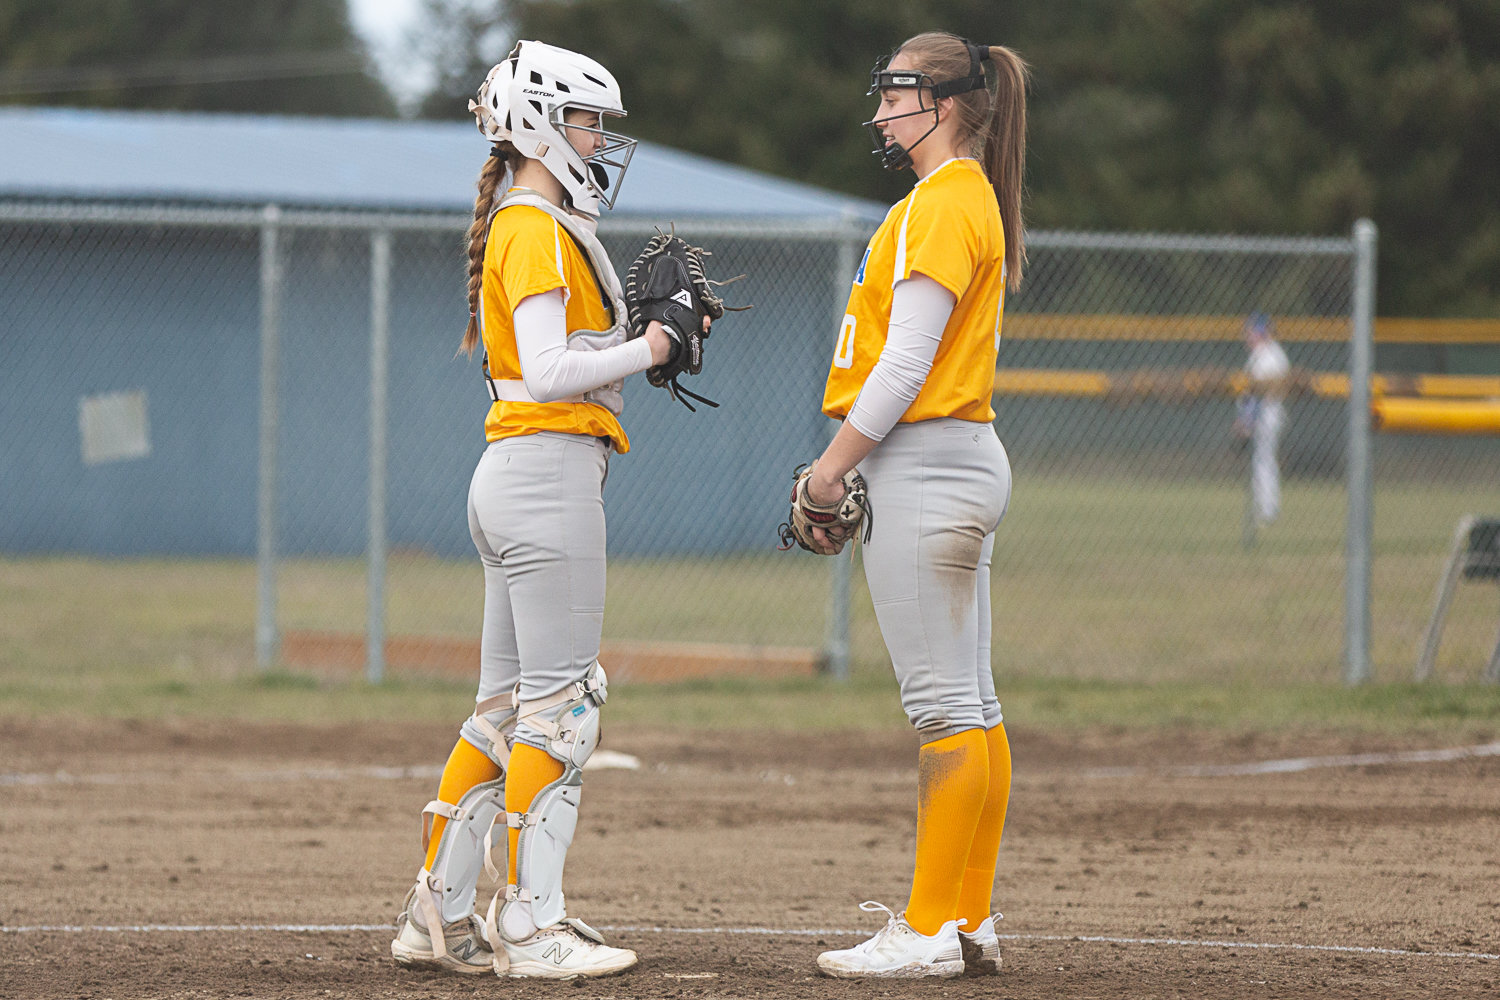 Adna's Brooklyn Loose (left) and Karlee VonMoos (right) chat between pitches against Rochester March 15.